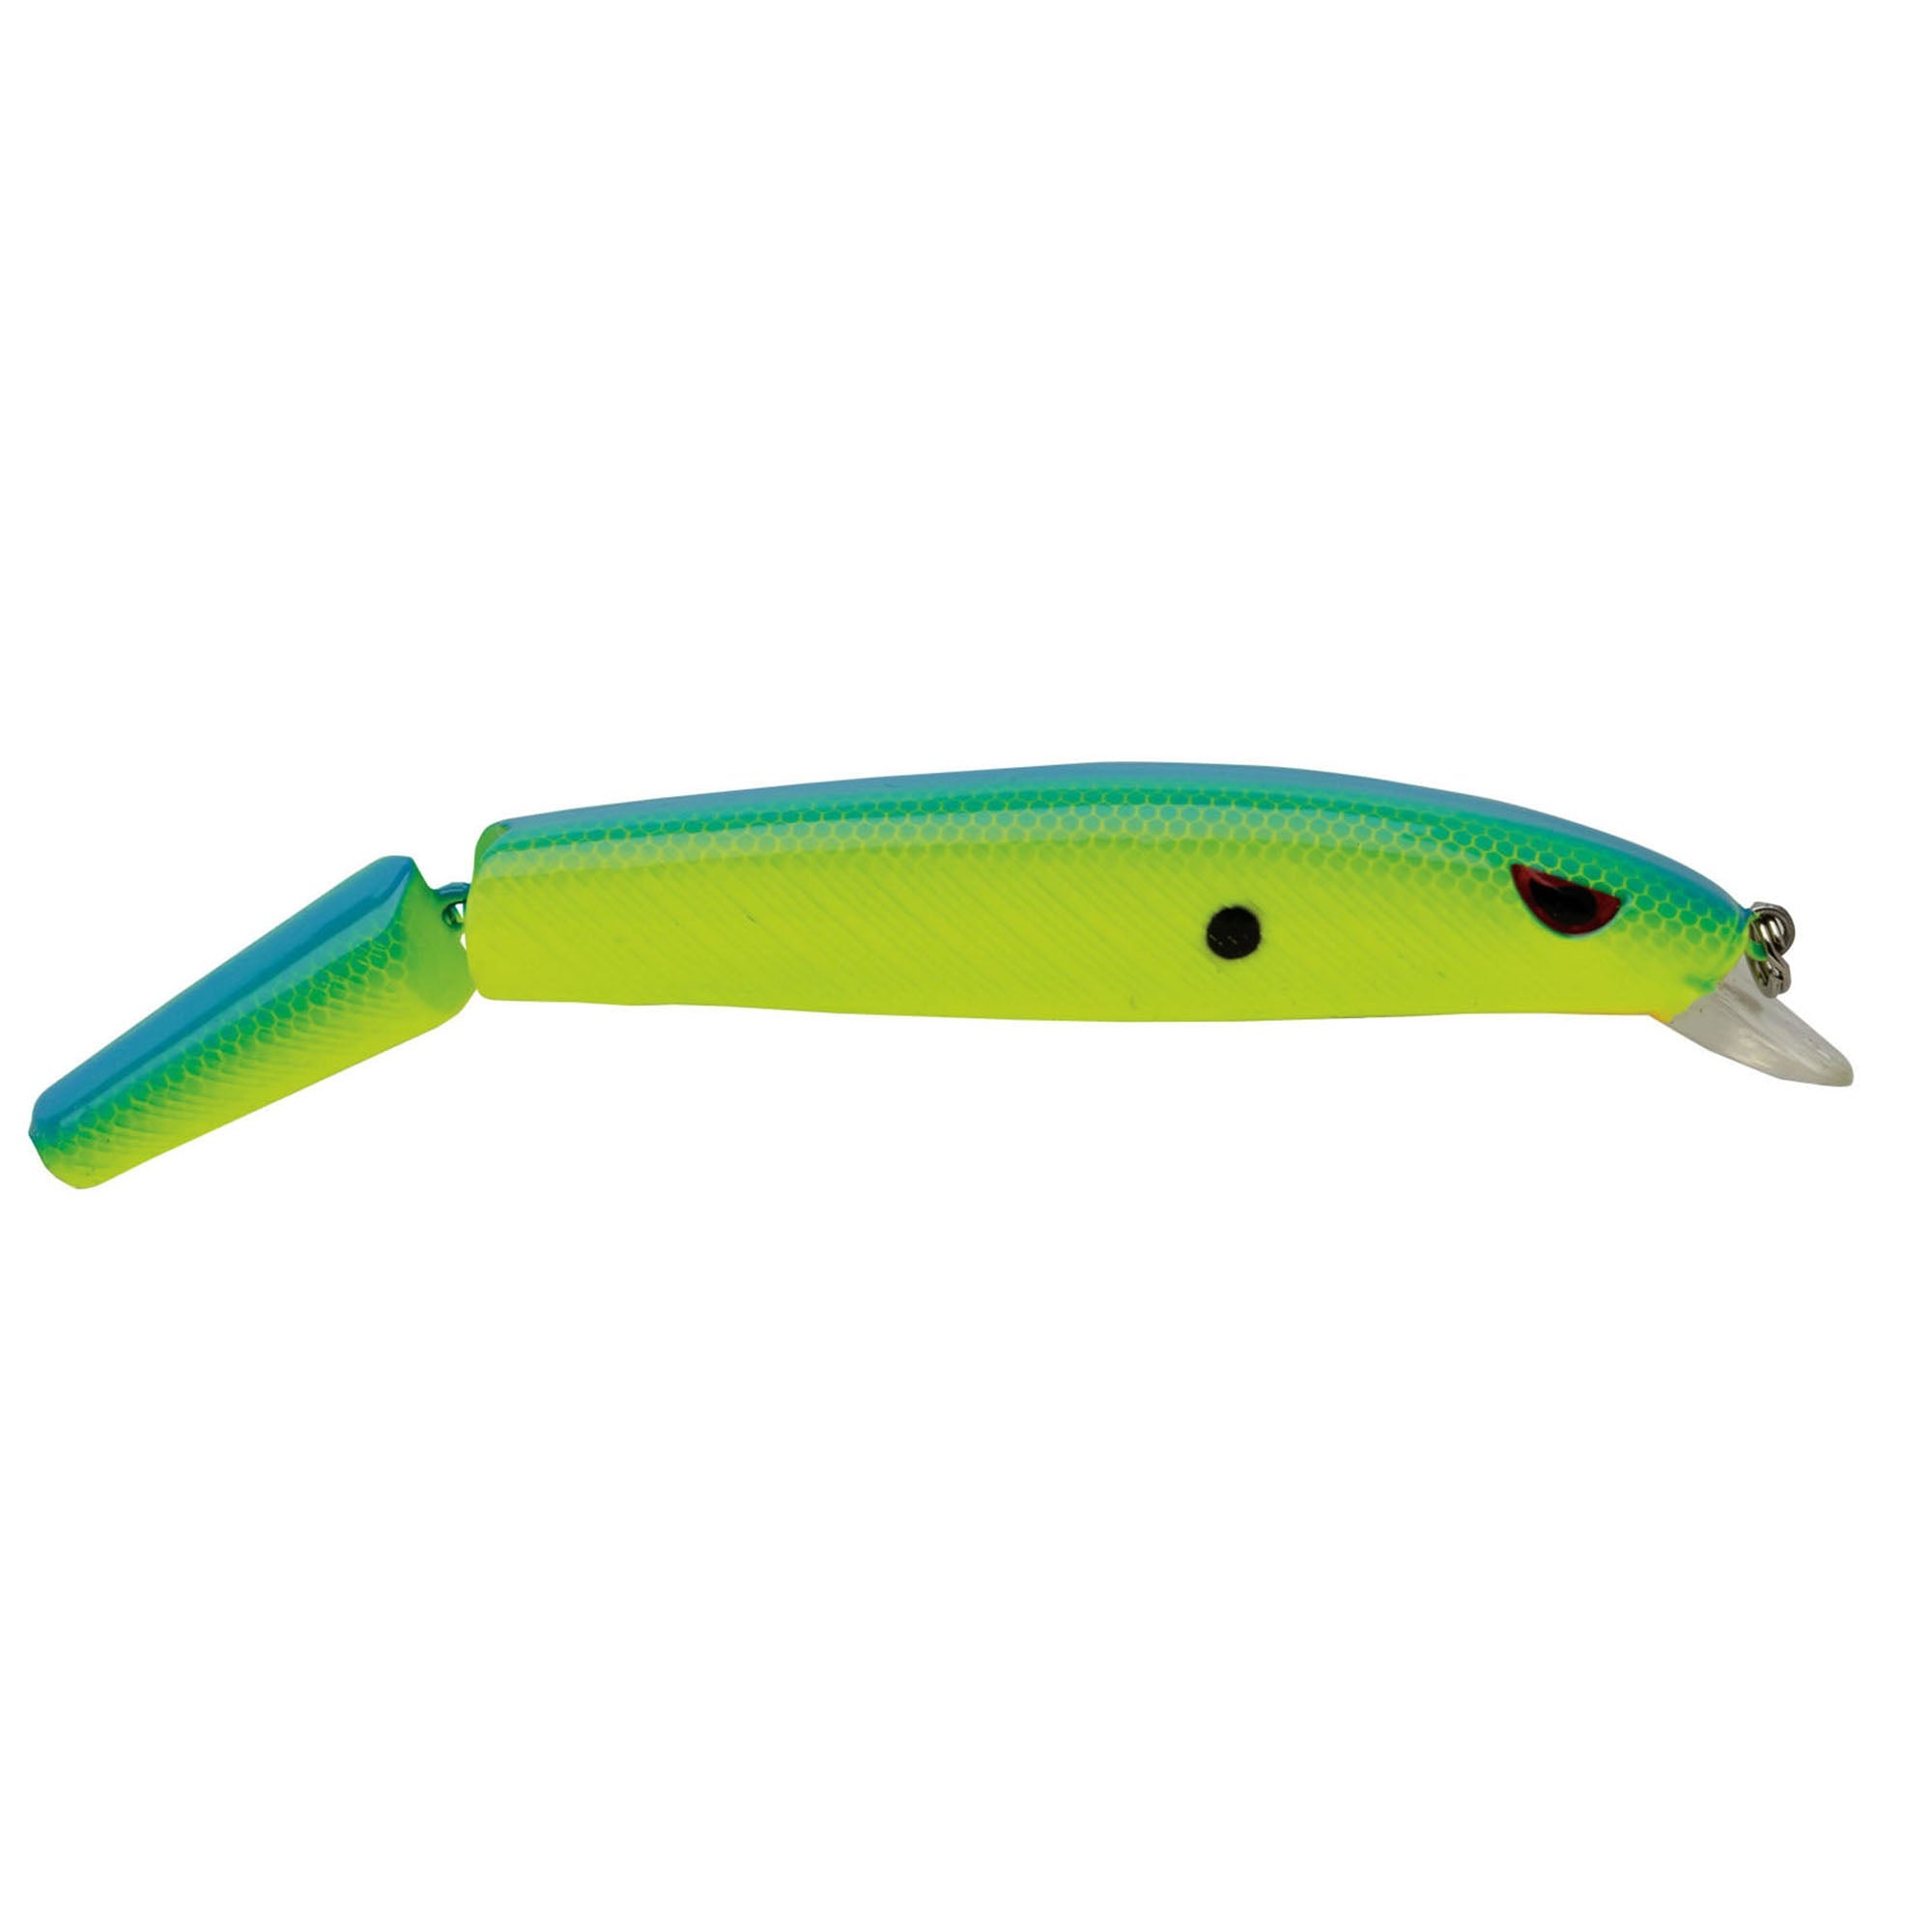 https://cdn.shopify.com/s/files/1/0542/5597/6629/products/p-line-angry-eye-predator-jointed-minnow-bait-6-12-qty-1-160638.jpg?v=1701125090